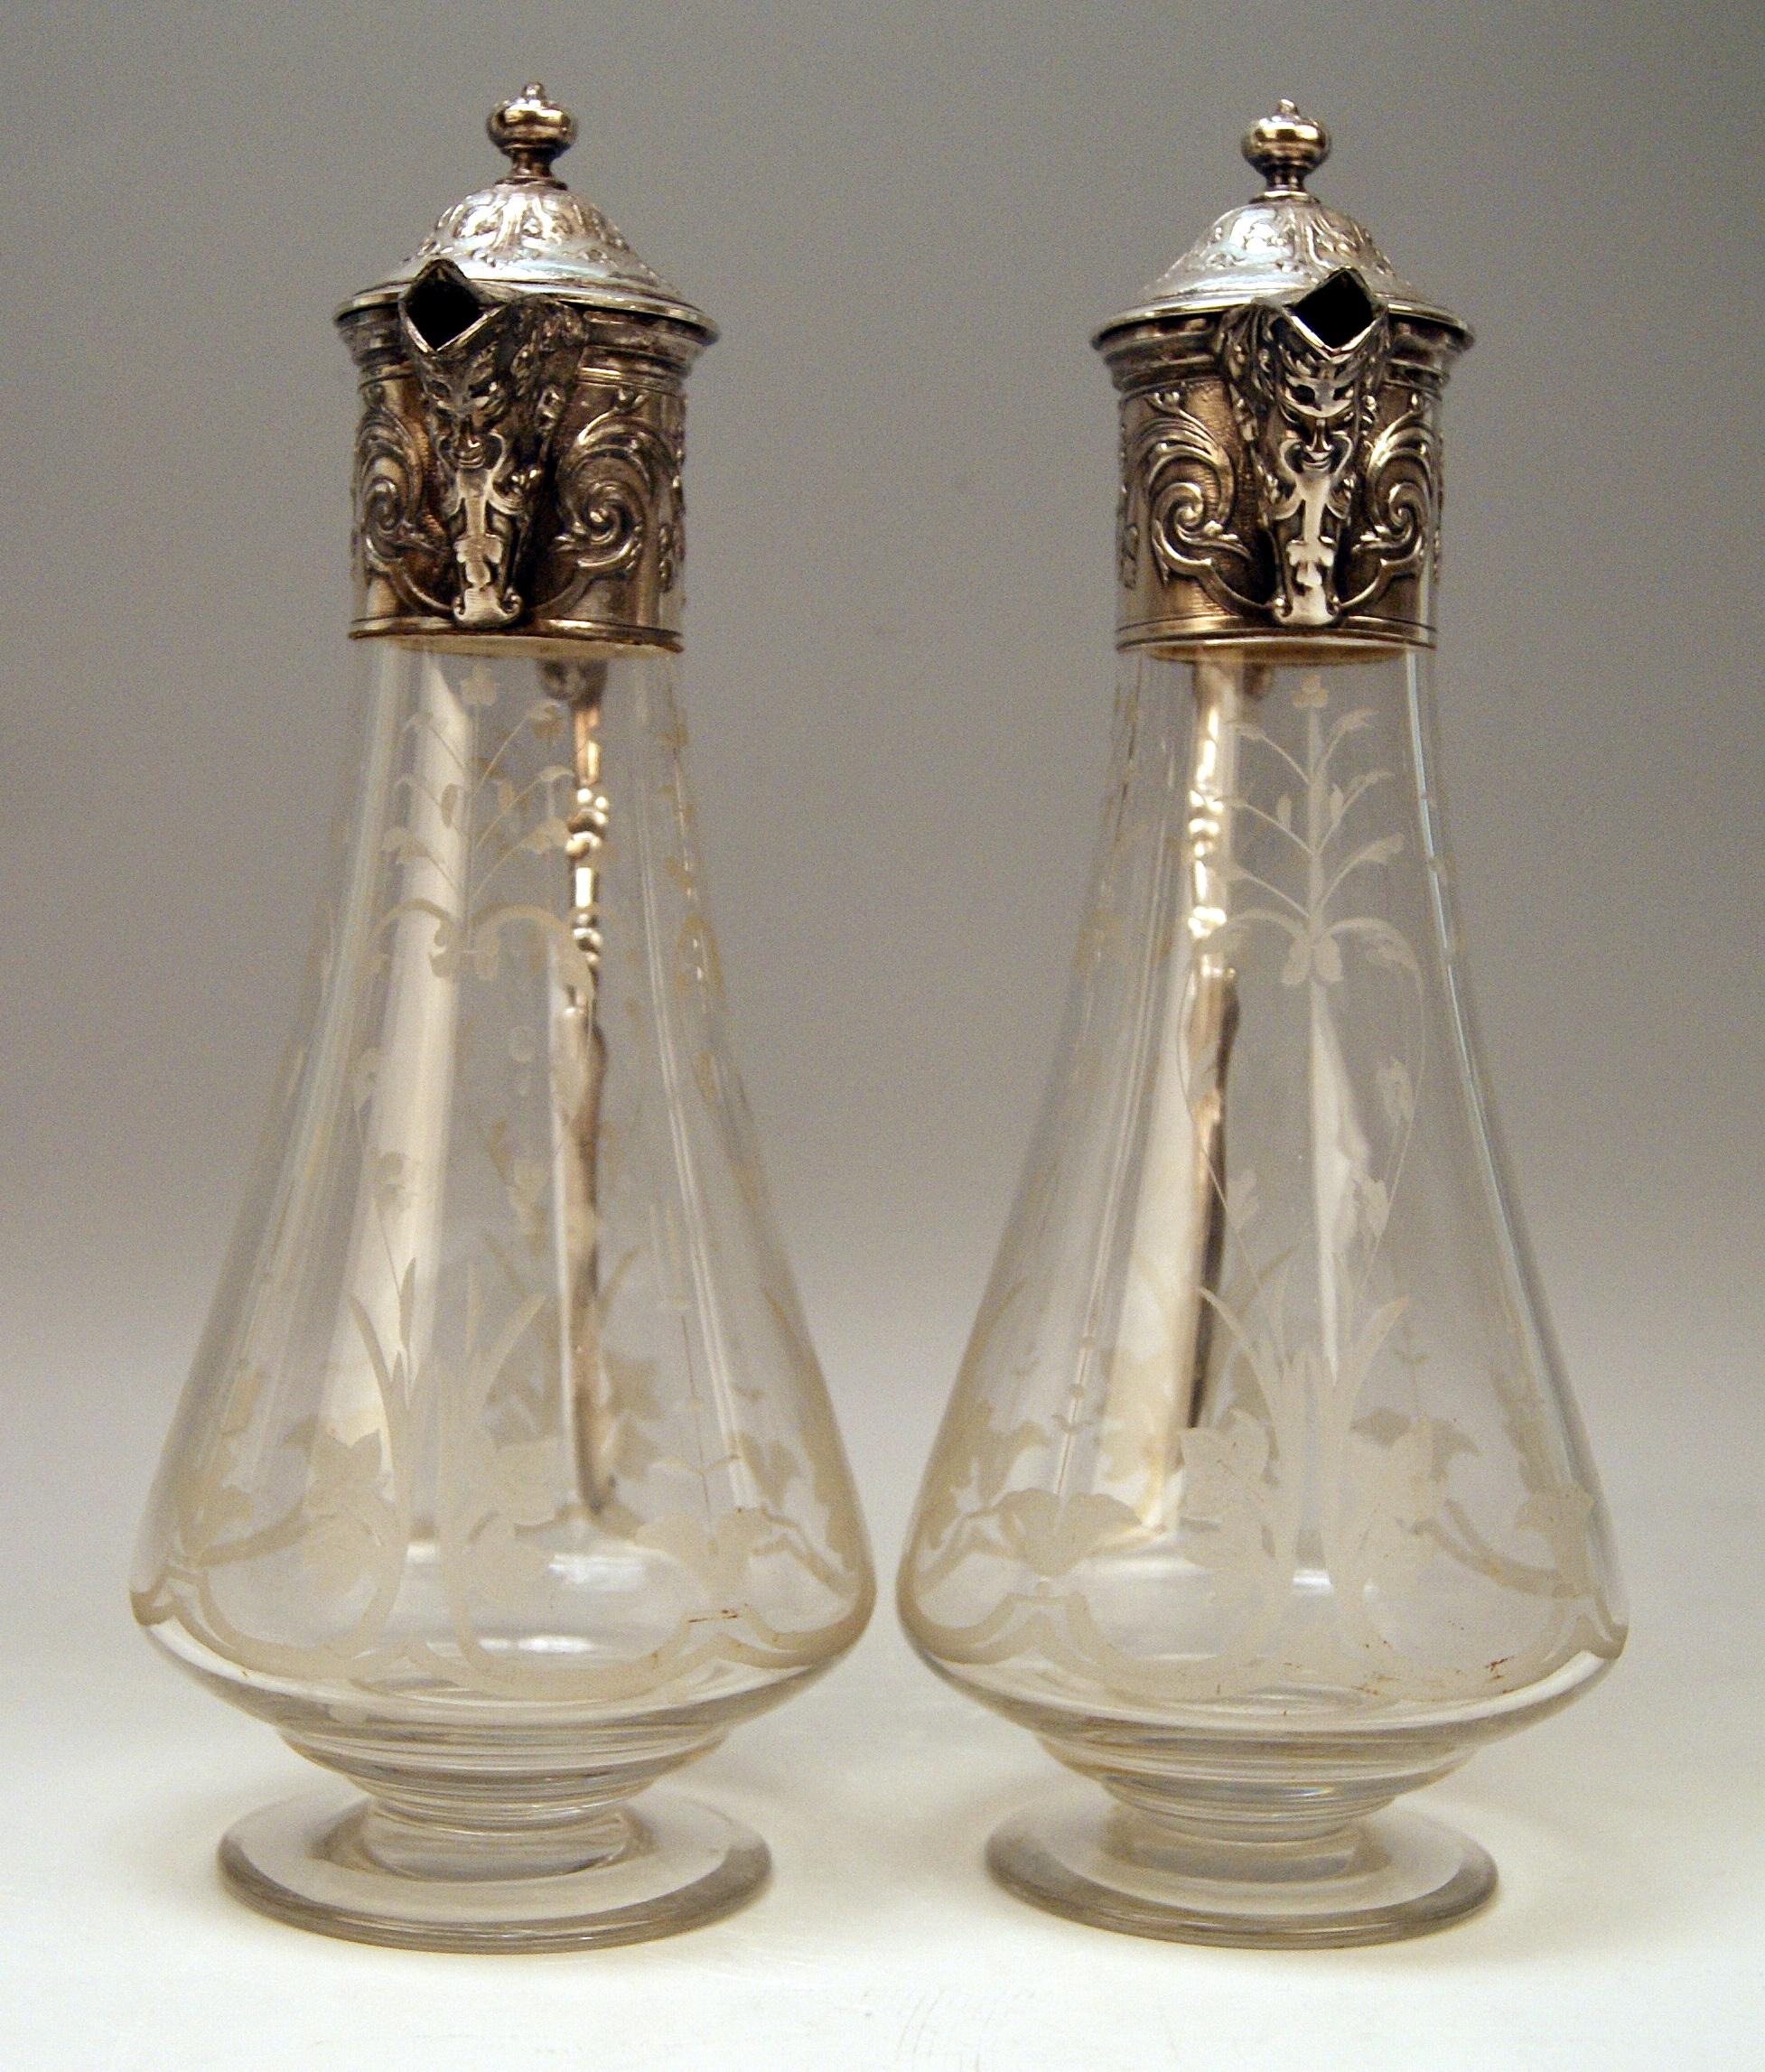 Late Victorian WMF Art Nouveau Pair of Claret and Water Jugs Silver Plated, Germany, circa 1900 For Sale